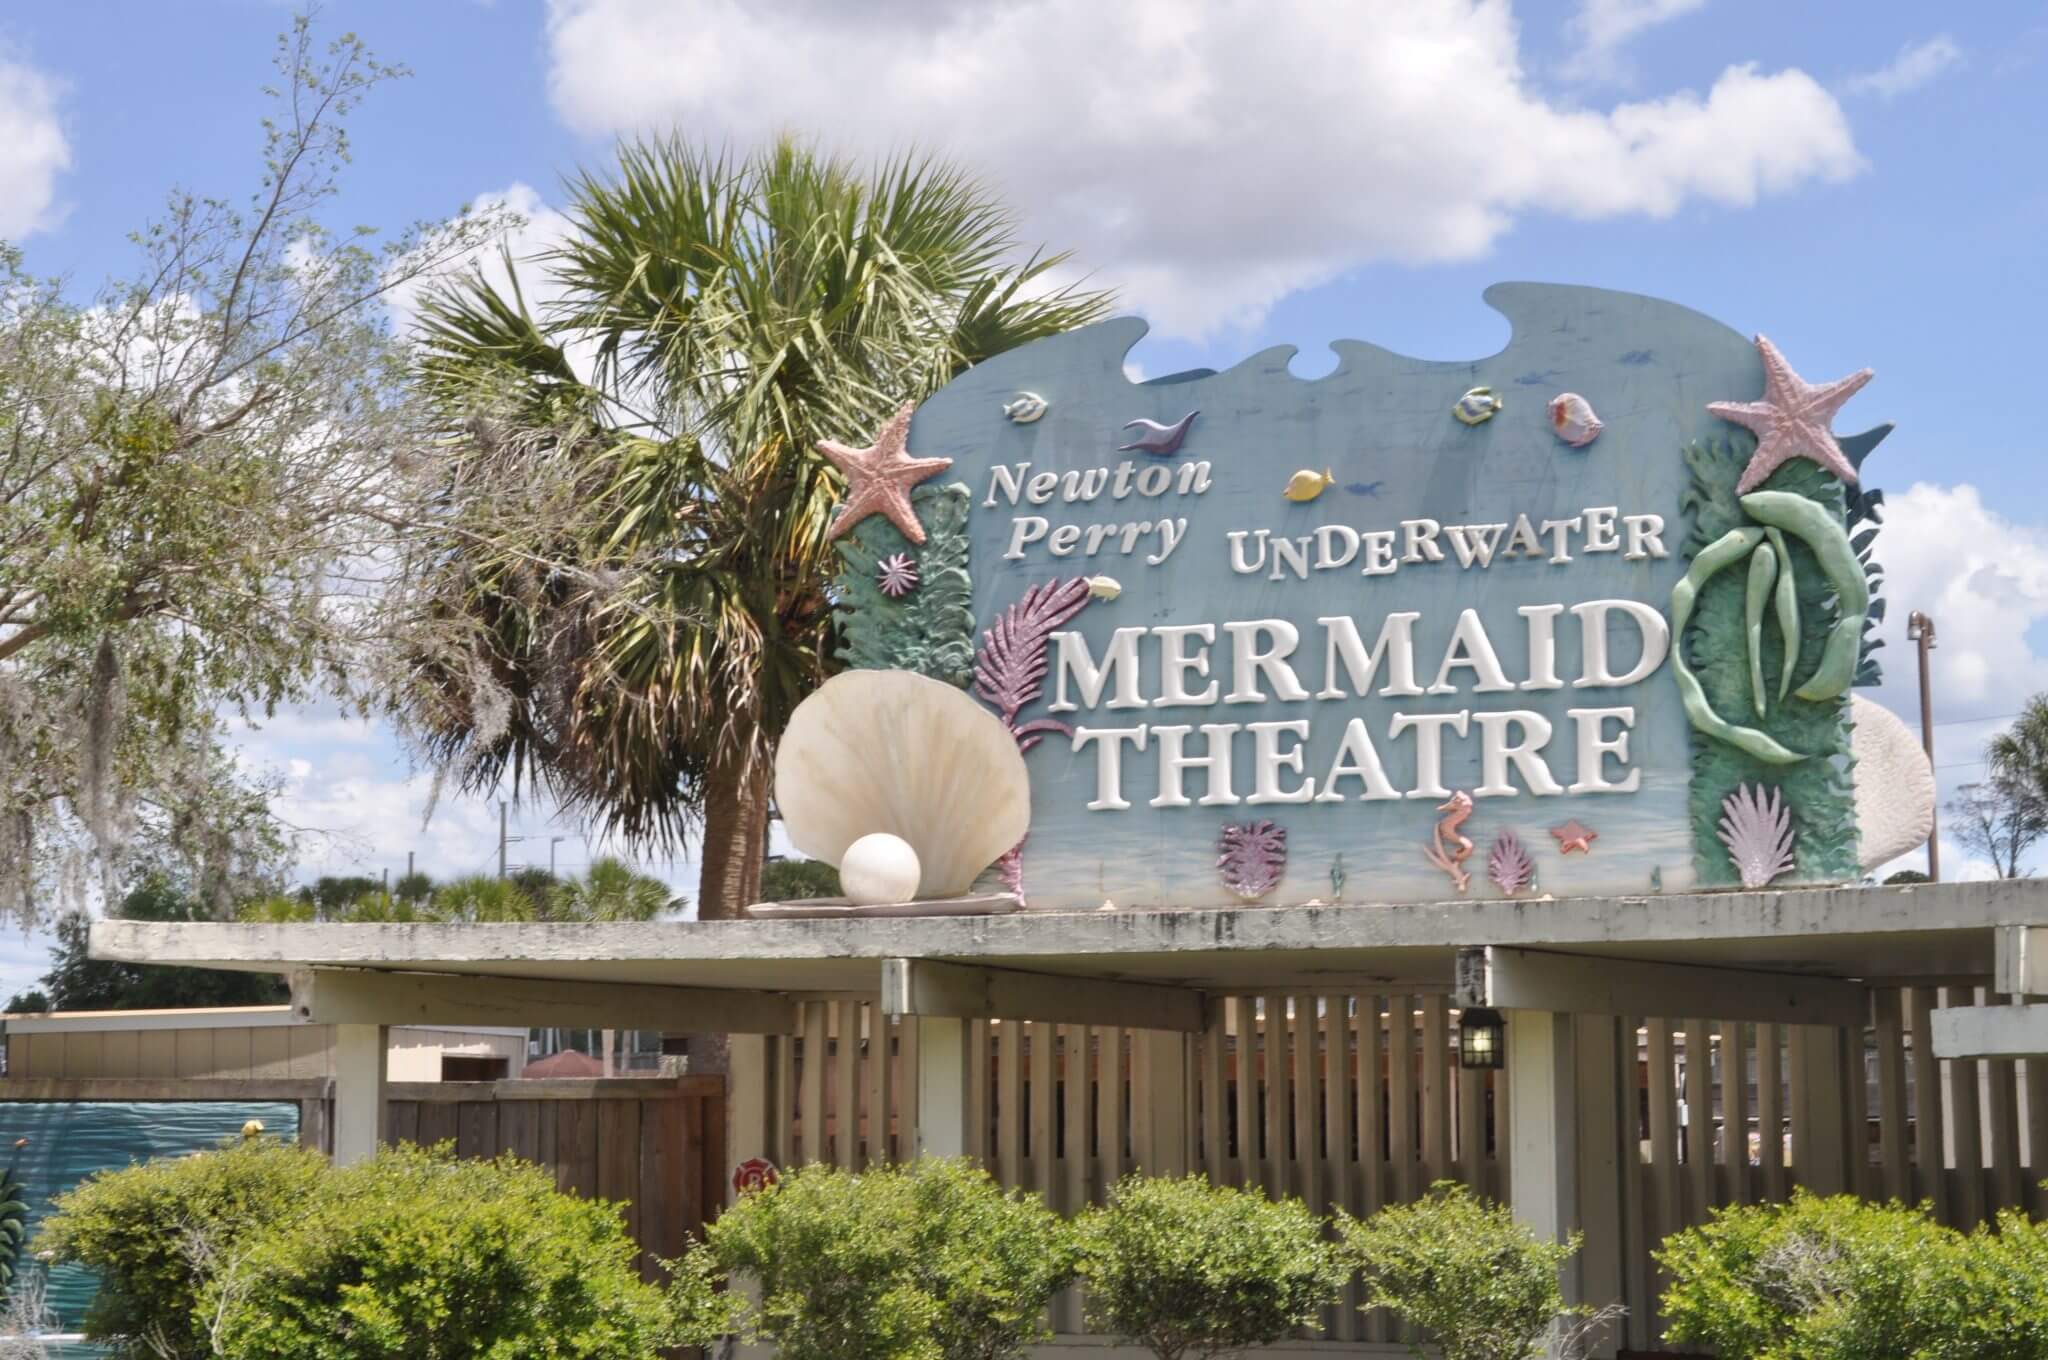 What to do in Tampa with Kids? See the mermaid show that is celebrating its 70 year anniversary...and much more. www.huntingforrubies.com